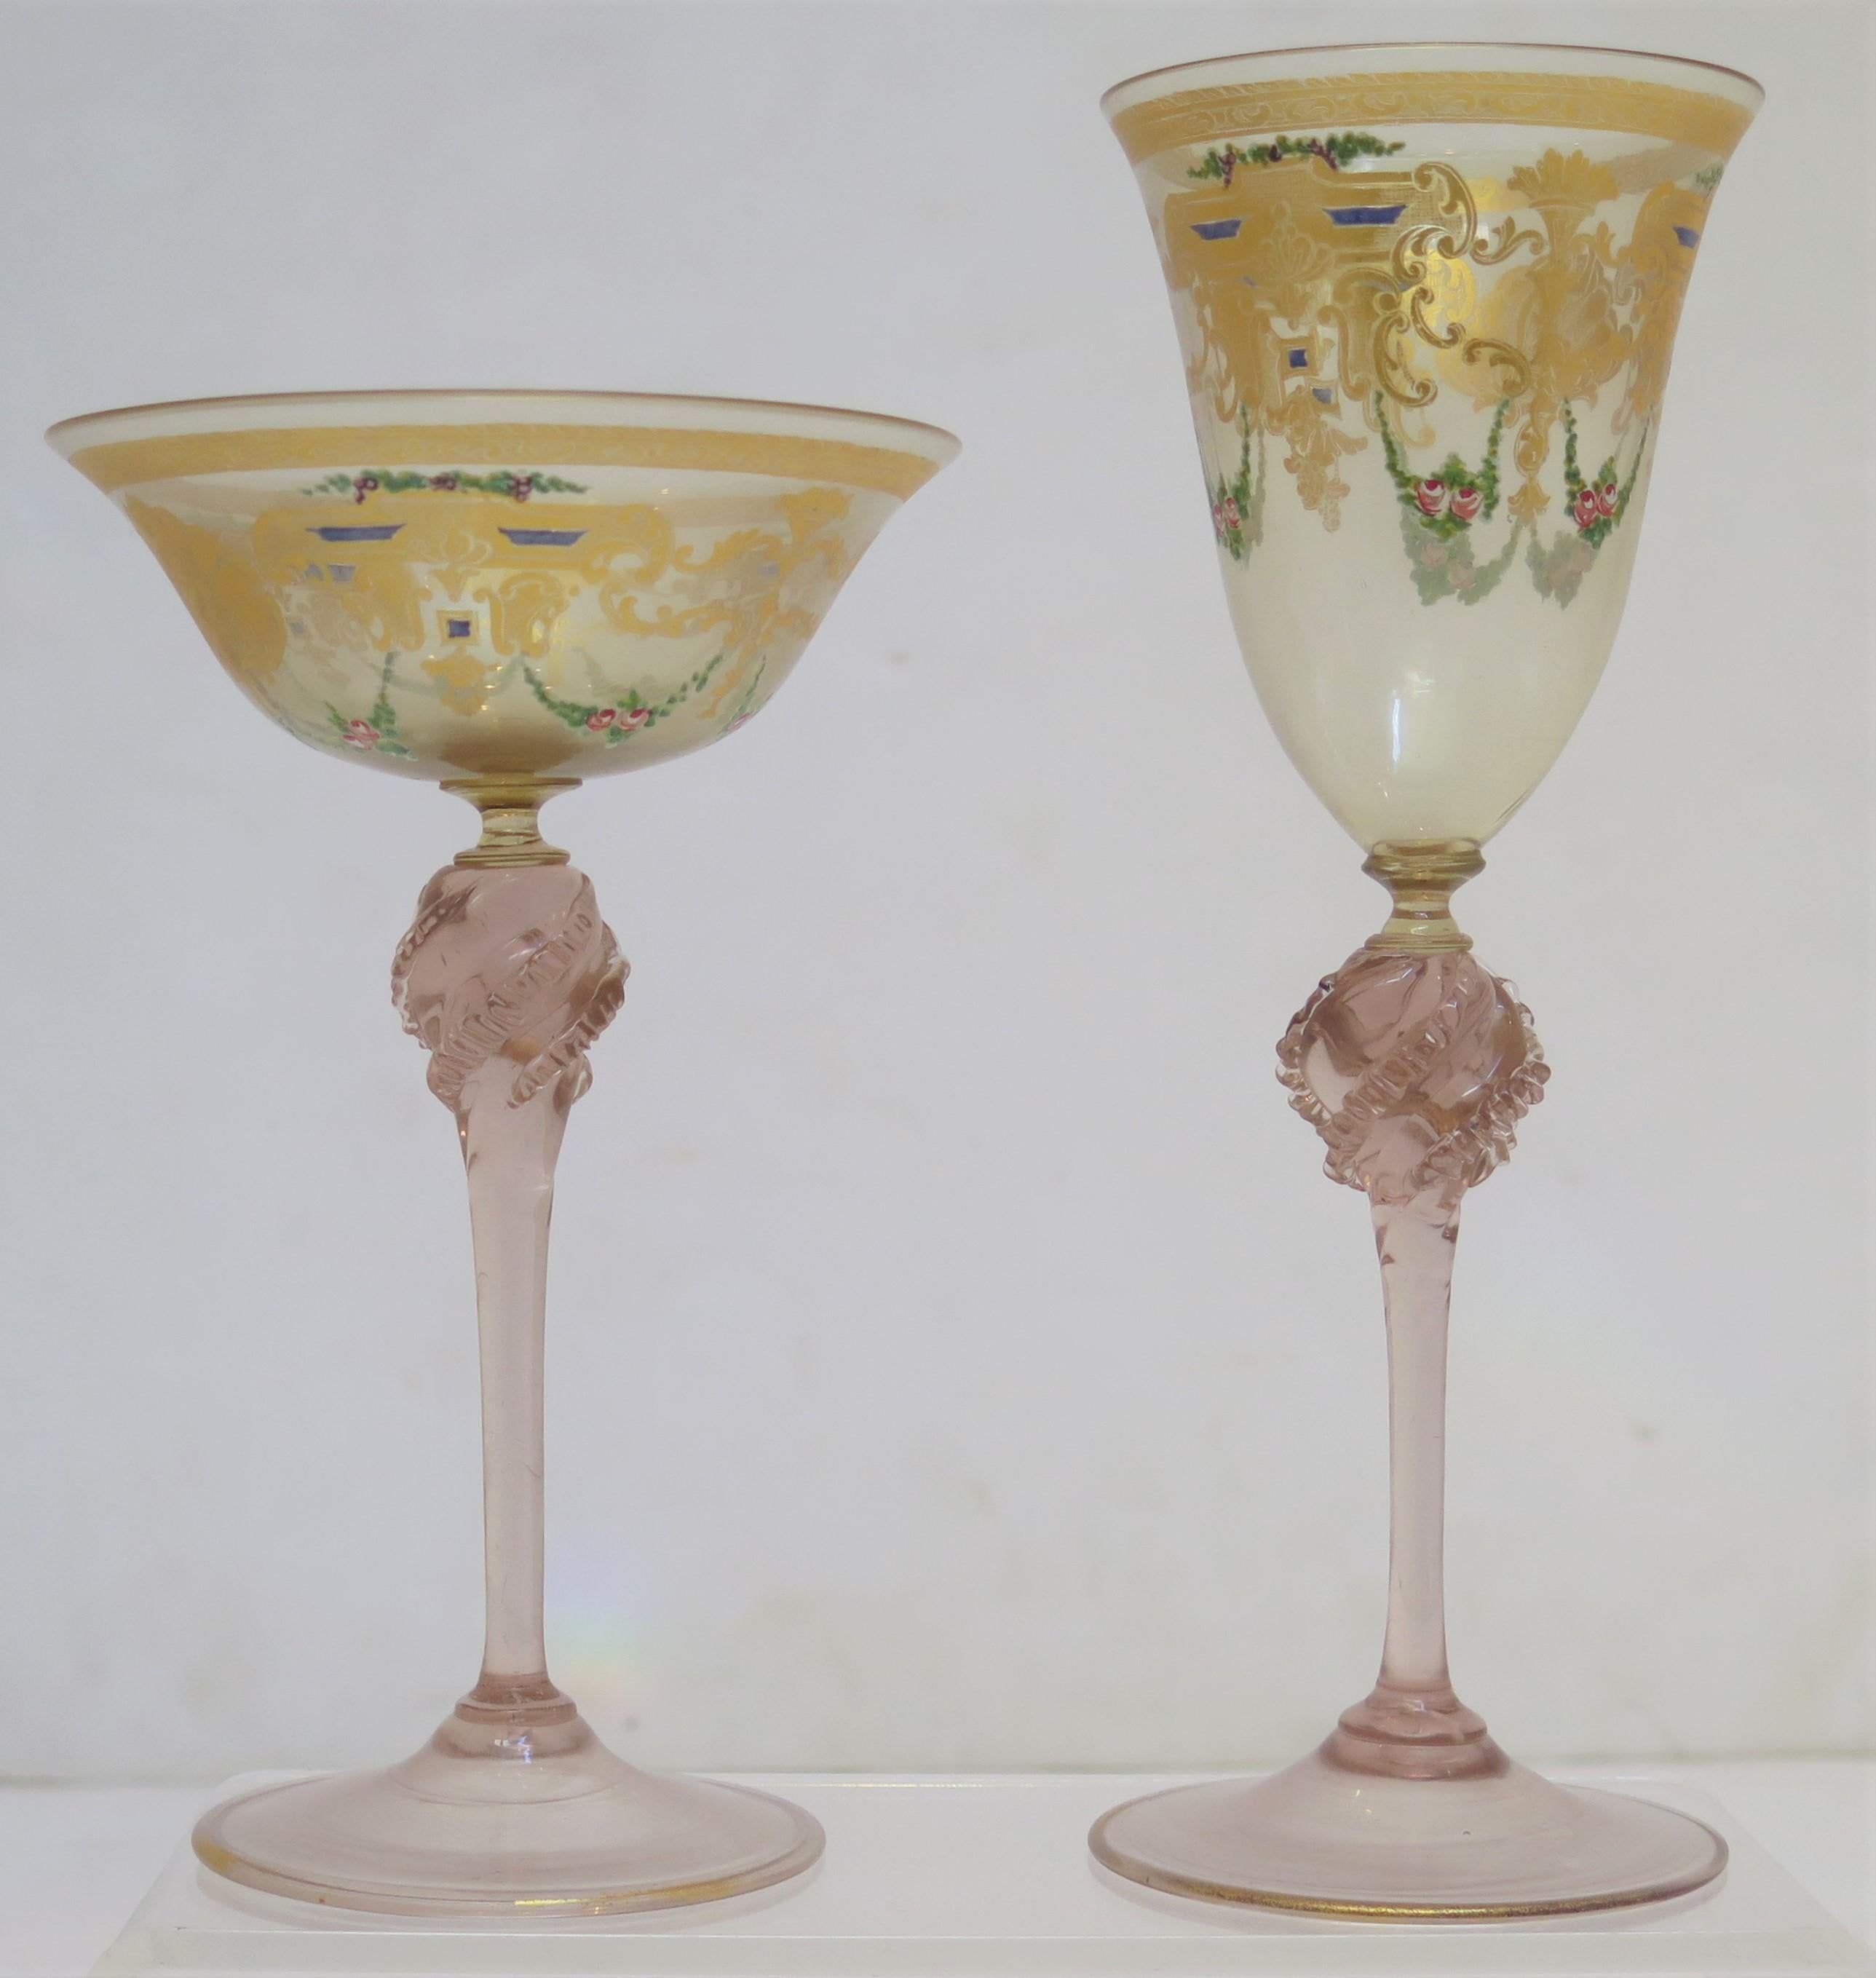 19th Century 45 Group of Venetian Murano Glass Stemware with Gilt and Hand-Painted Decoration For Sale